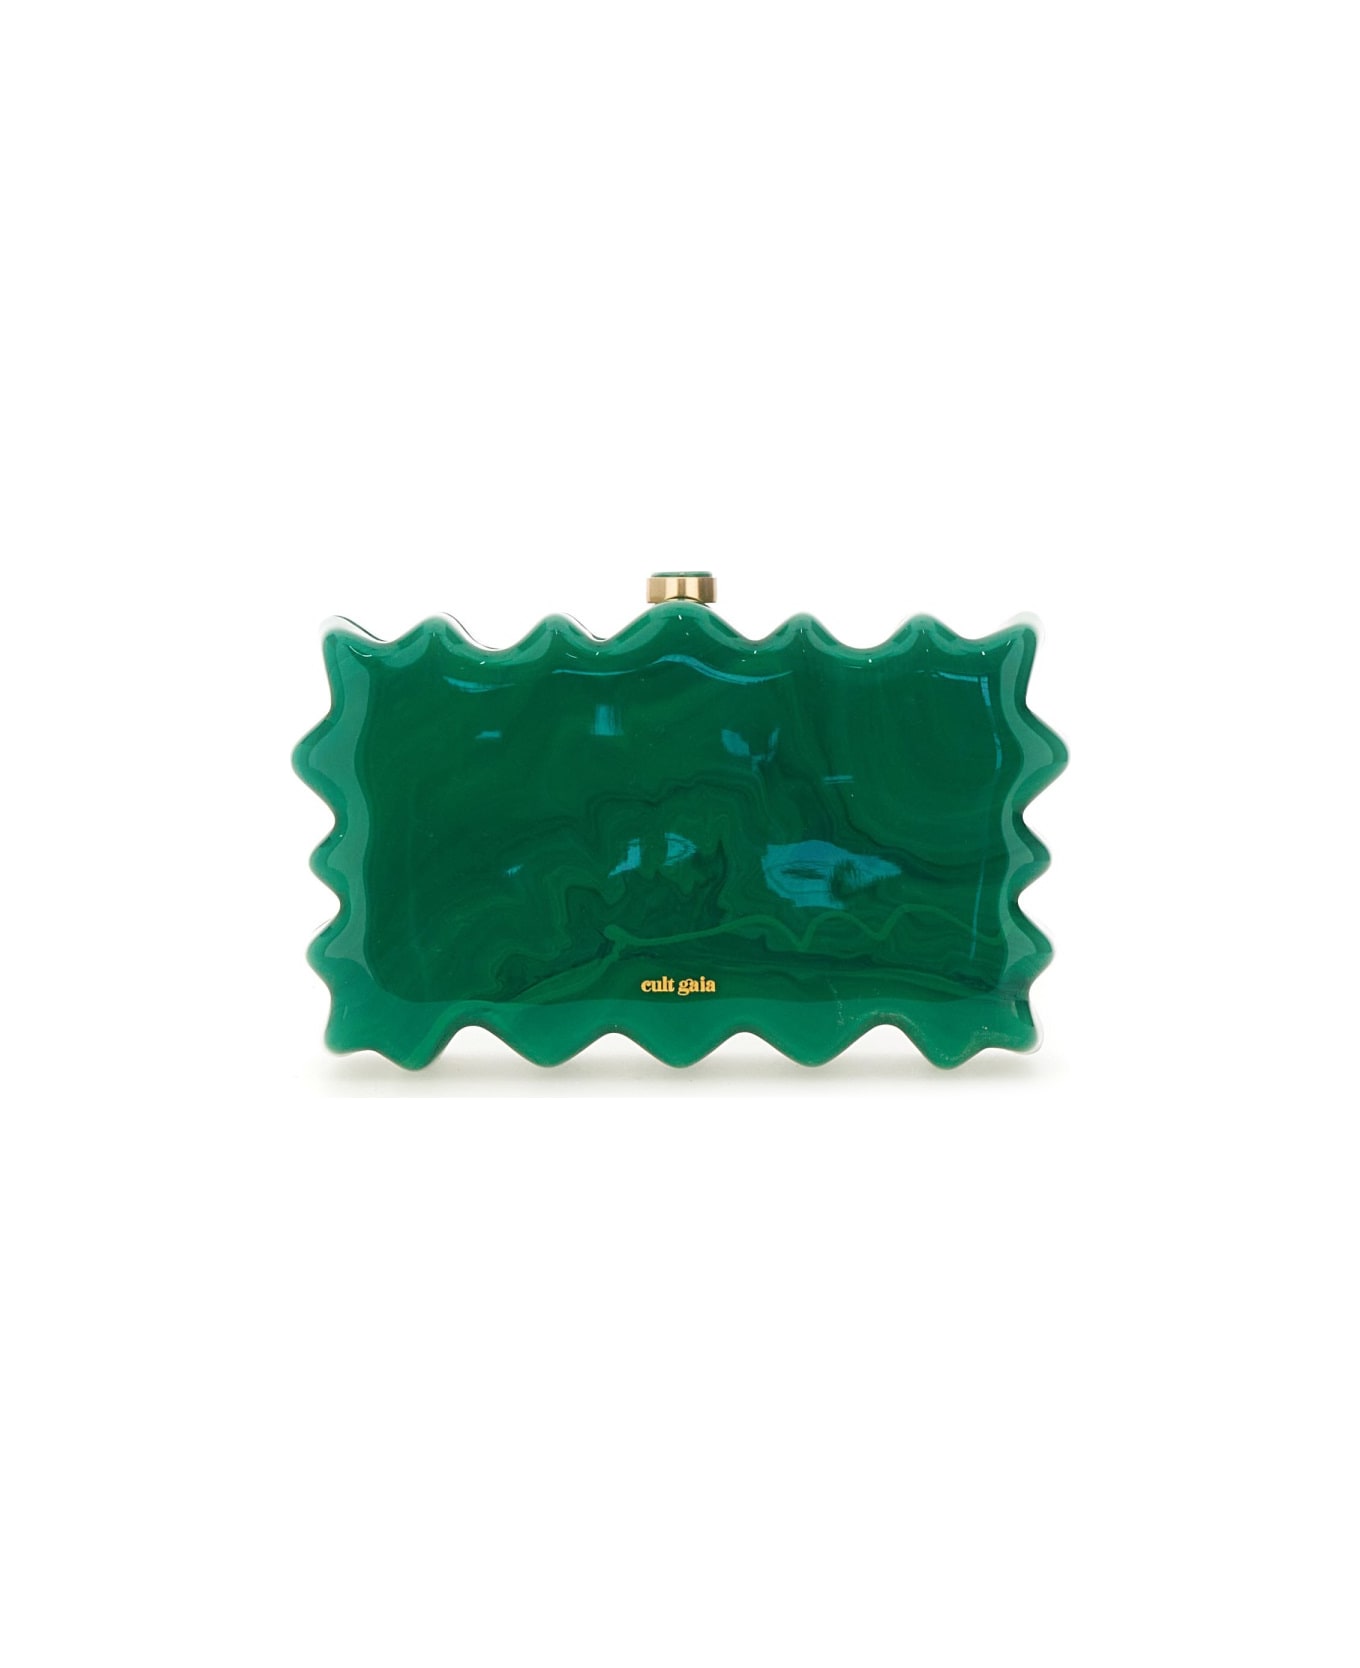 Cult Gaia Clutch Bag "paloma" - GREEN クラッチバッグ